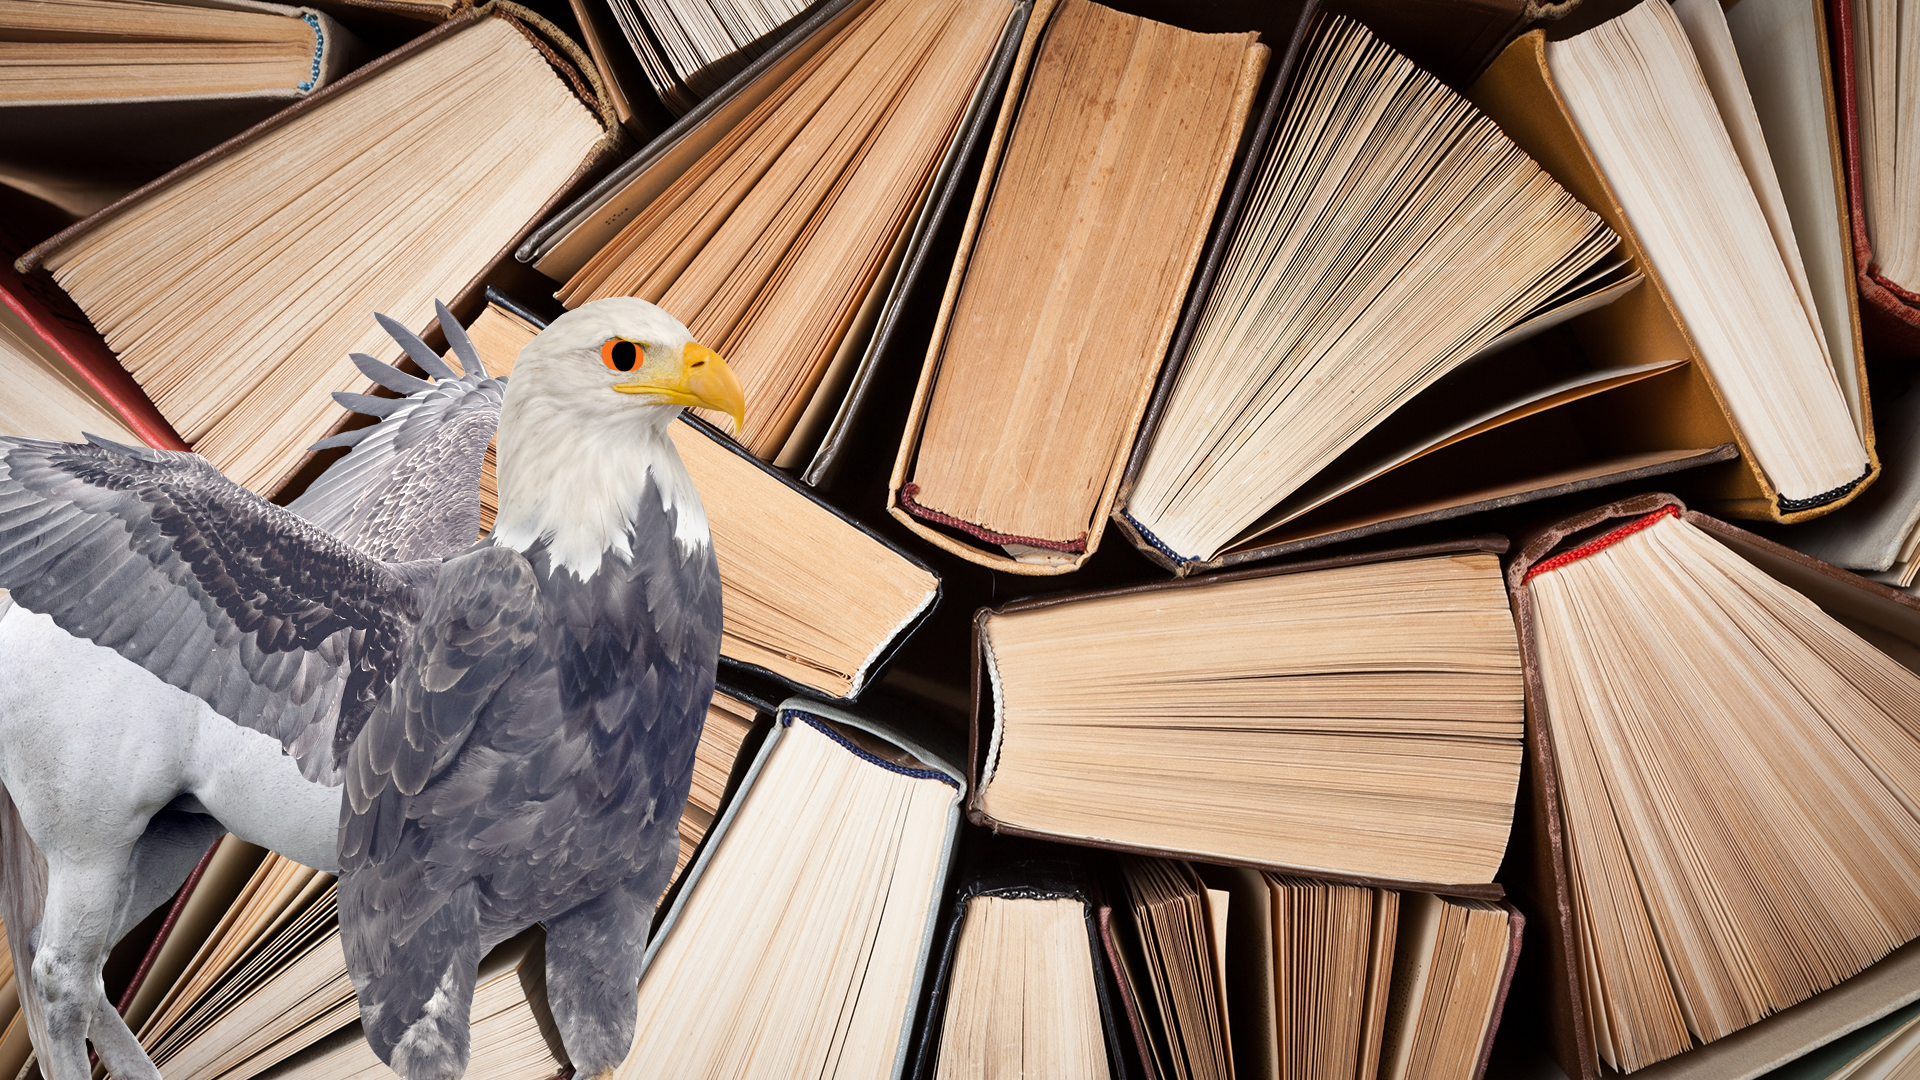 A hippogriff observes a selection of old books